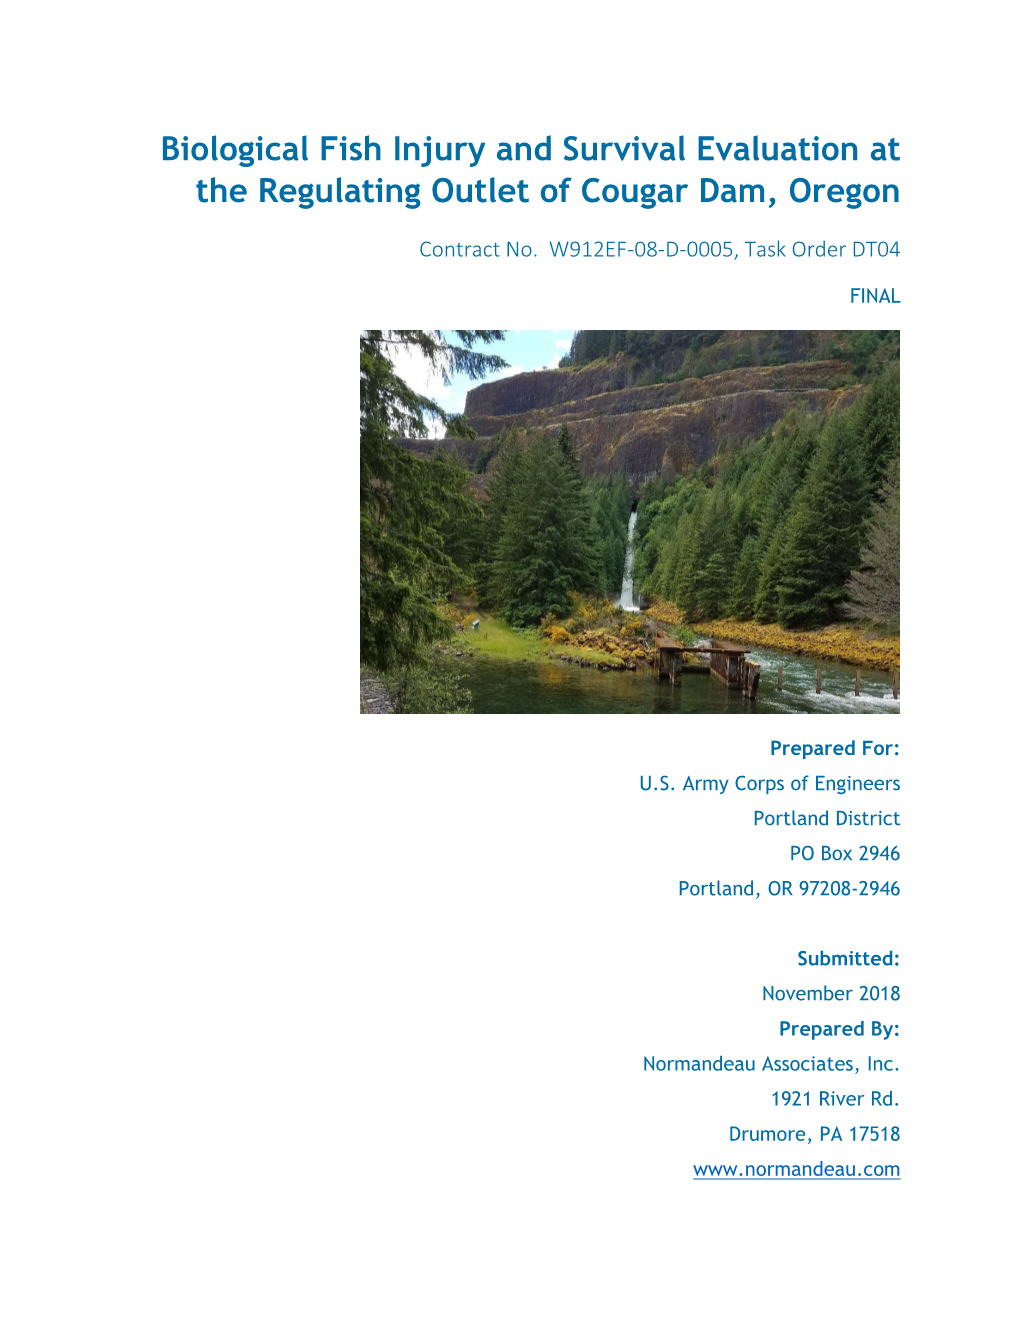 Biological Fish Injury and Survival Evaluation at the Regulating Outlet of Cougar Dam, Oregon